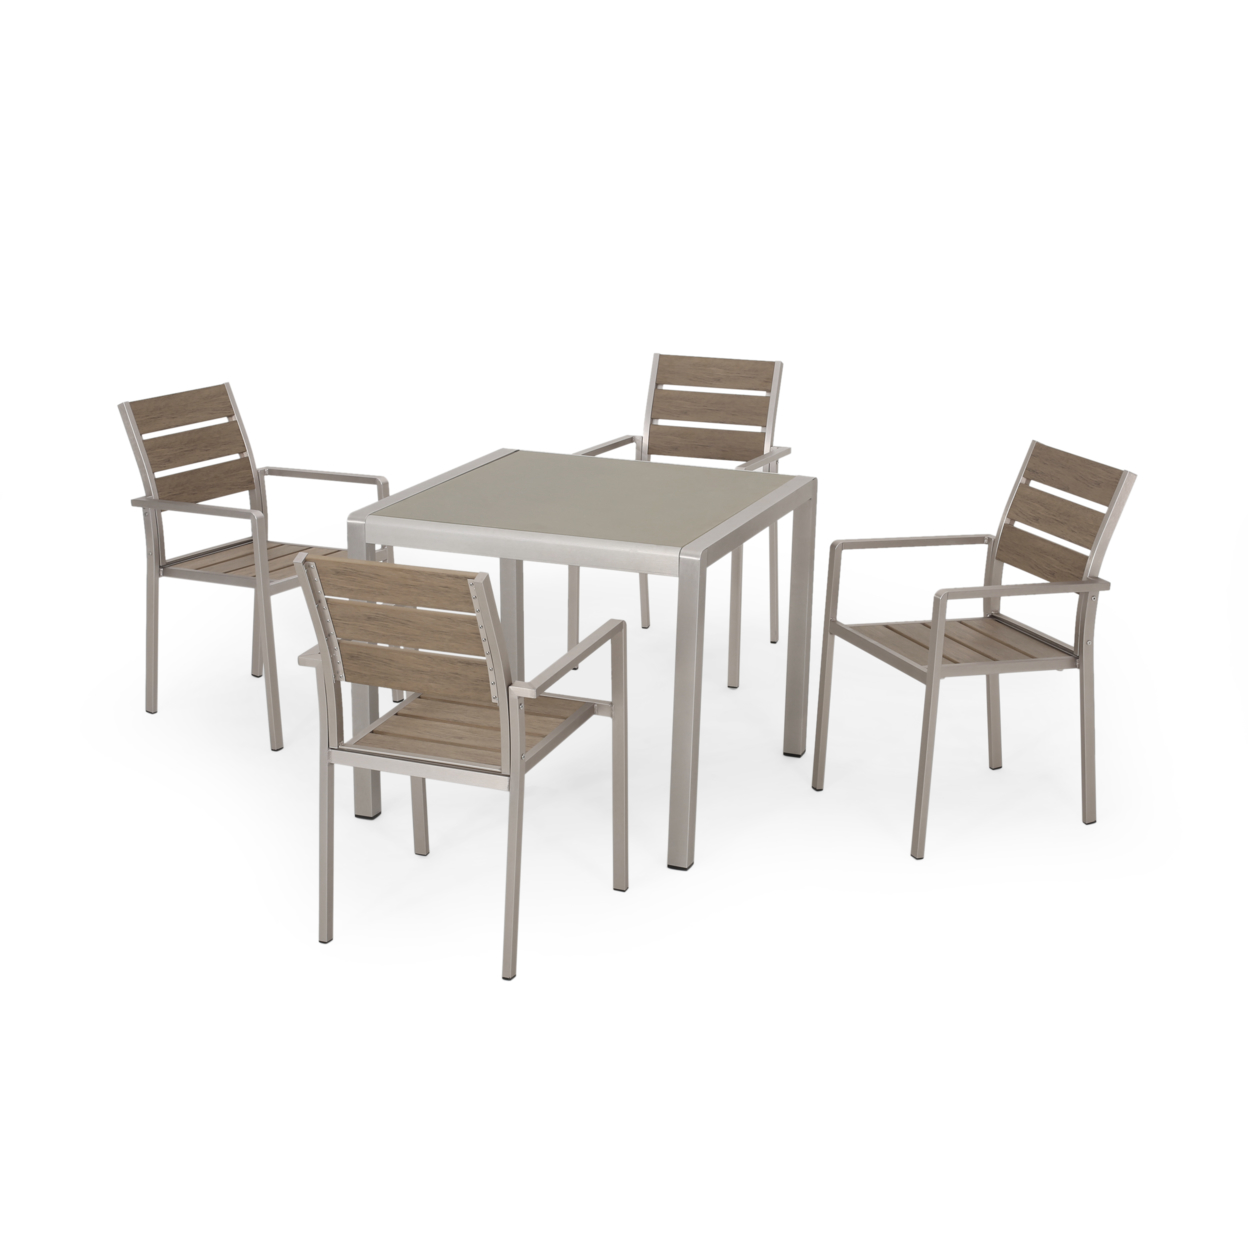 Olive Outdoor Modern Aluminum 4 Seater Dining Set With Faux Wood Seats